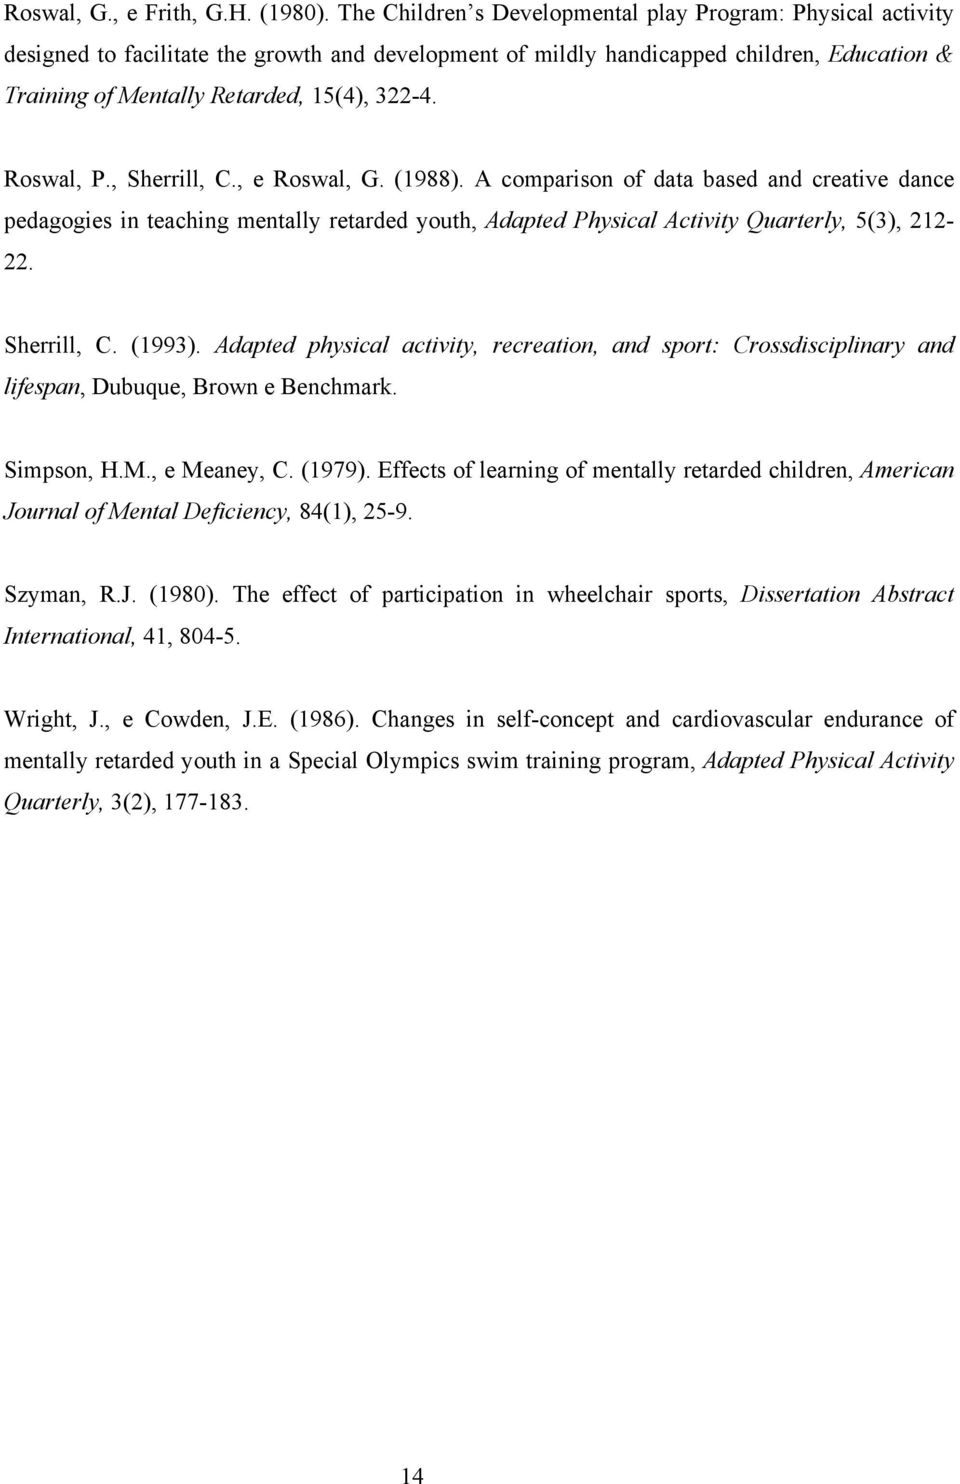 Roswal, P., Sherrill, C., e Roswal, G. (1988). A comparison of data based and creative dance pedagogies in teaching mentally retarded youth, Adapted Physical Activity Quarterly, 5(3), 212-22.